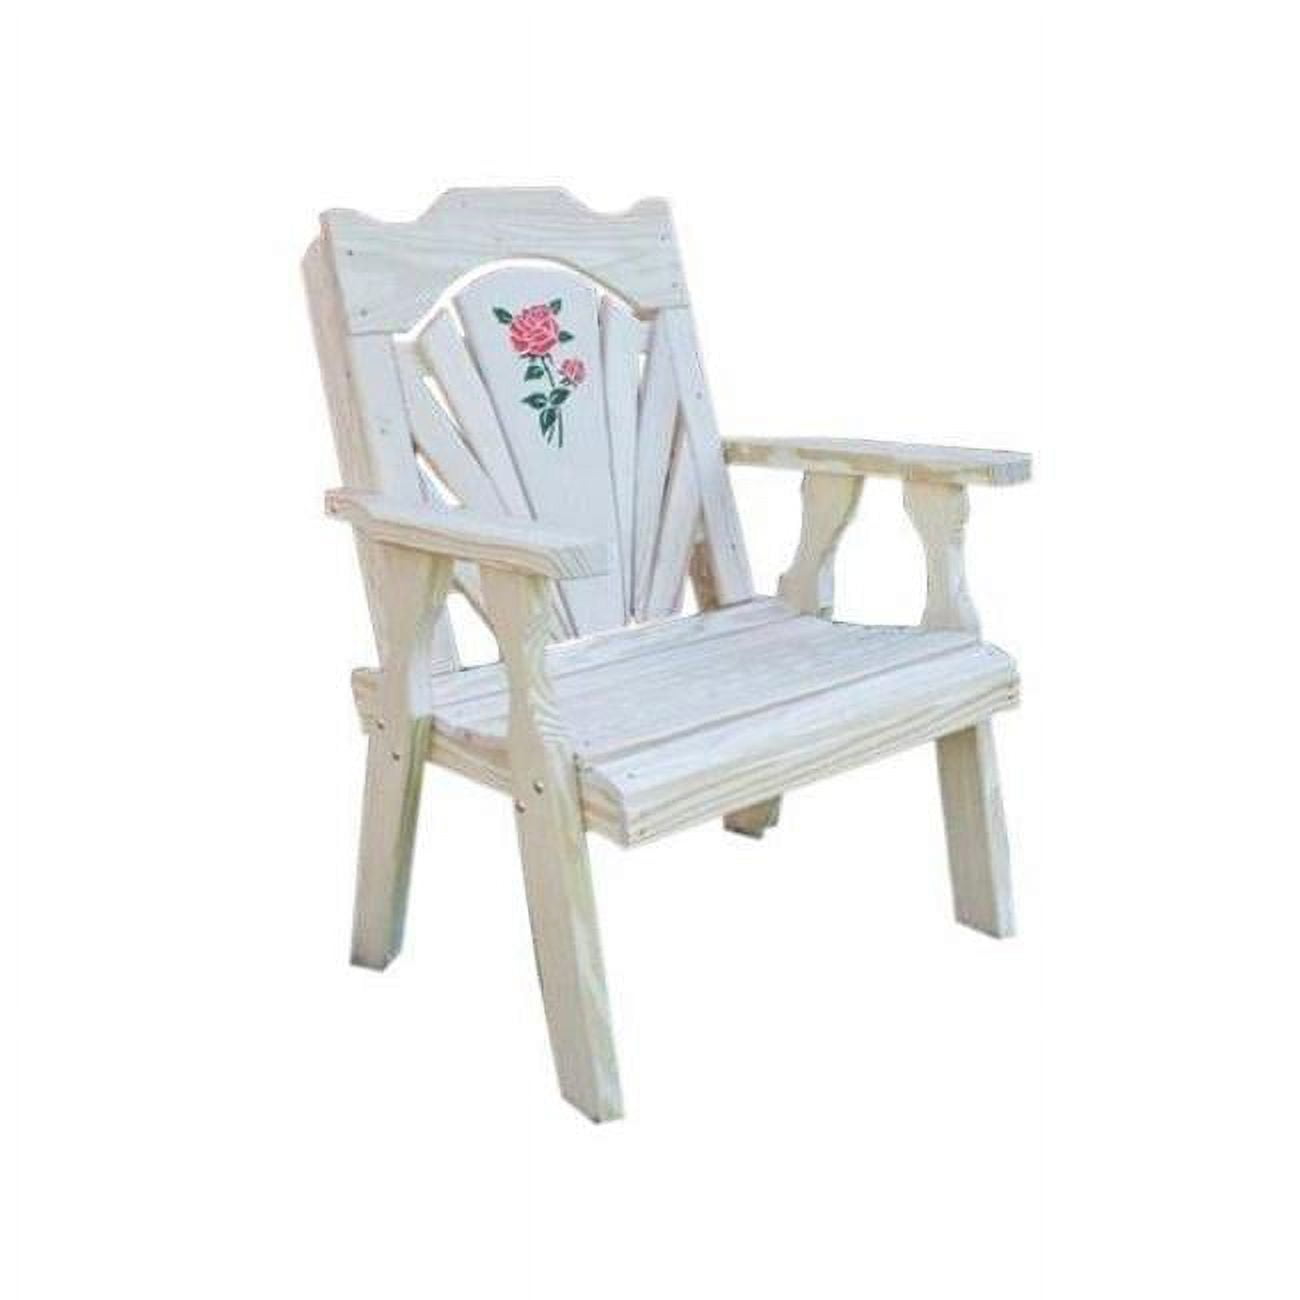 Fc24fbrosecvd Treated Pine Fanback Patio Chair With Rose Design